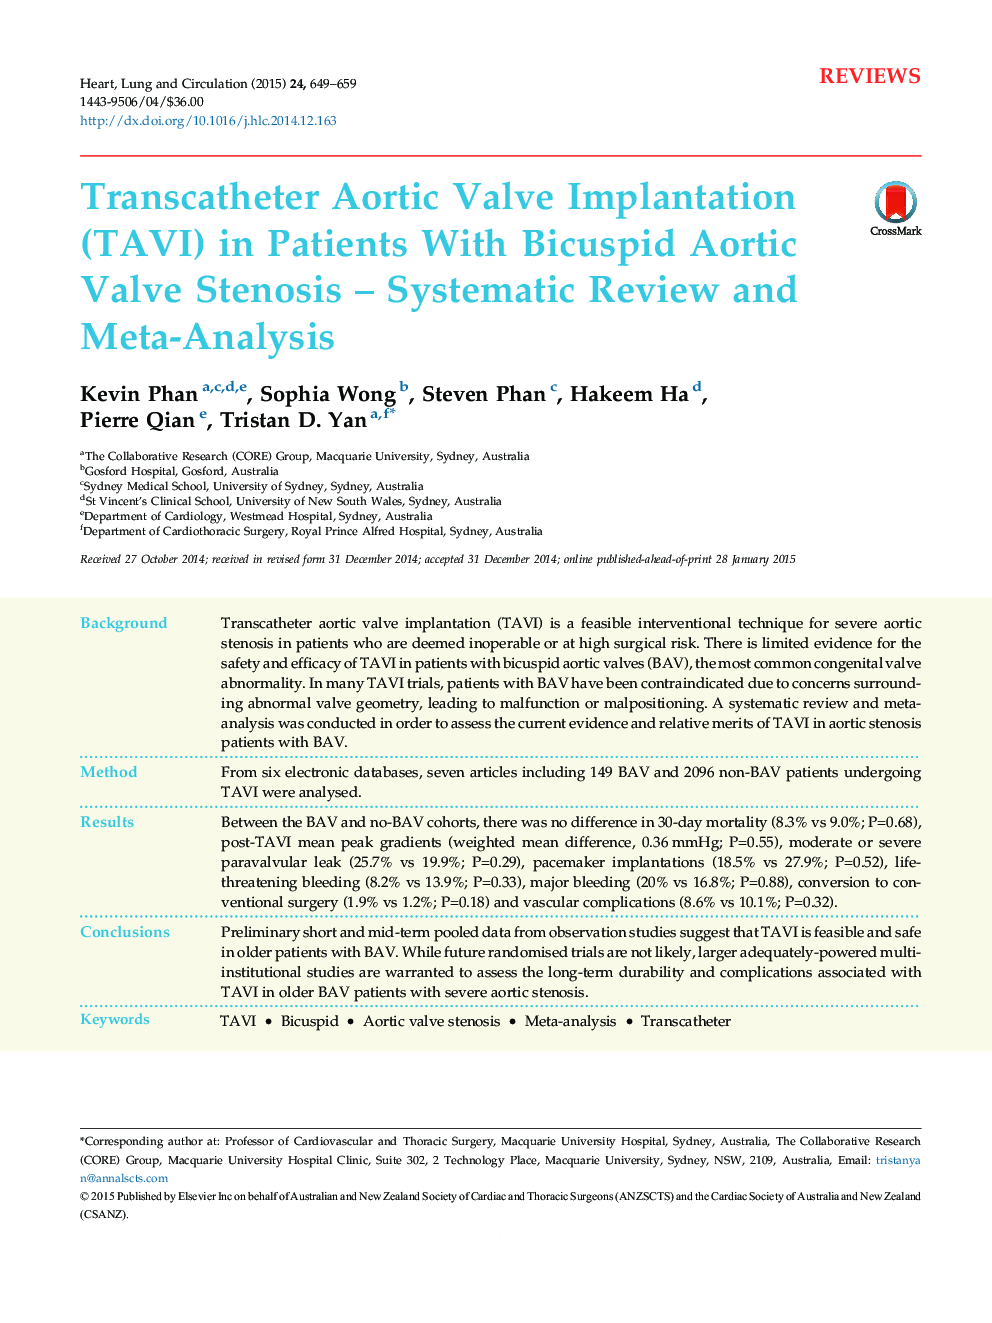 Transcatheter Aortic Valve Implantation (TAVI) in Patients With Bicuspid Aortic Valve Stenosis - Systematic Review and Meta-Analysis